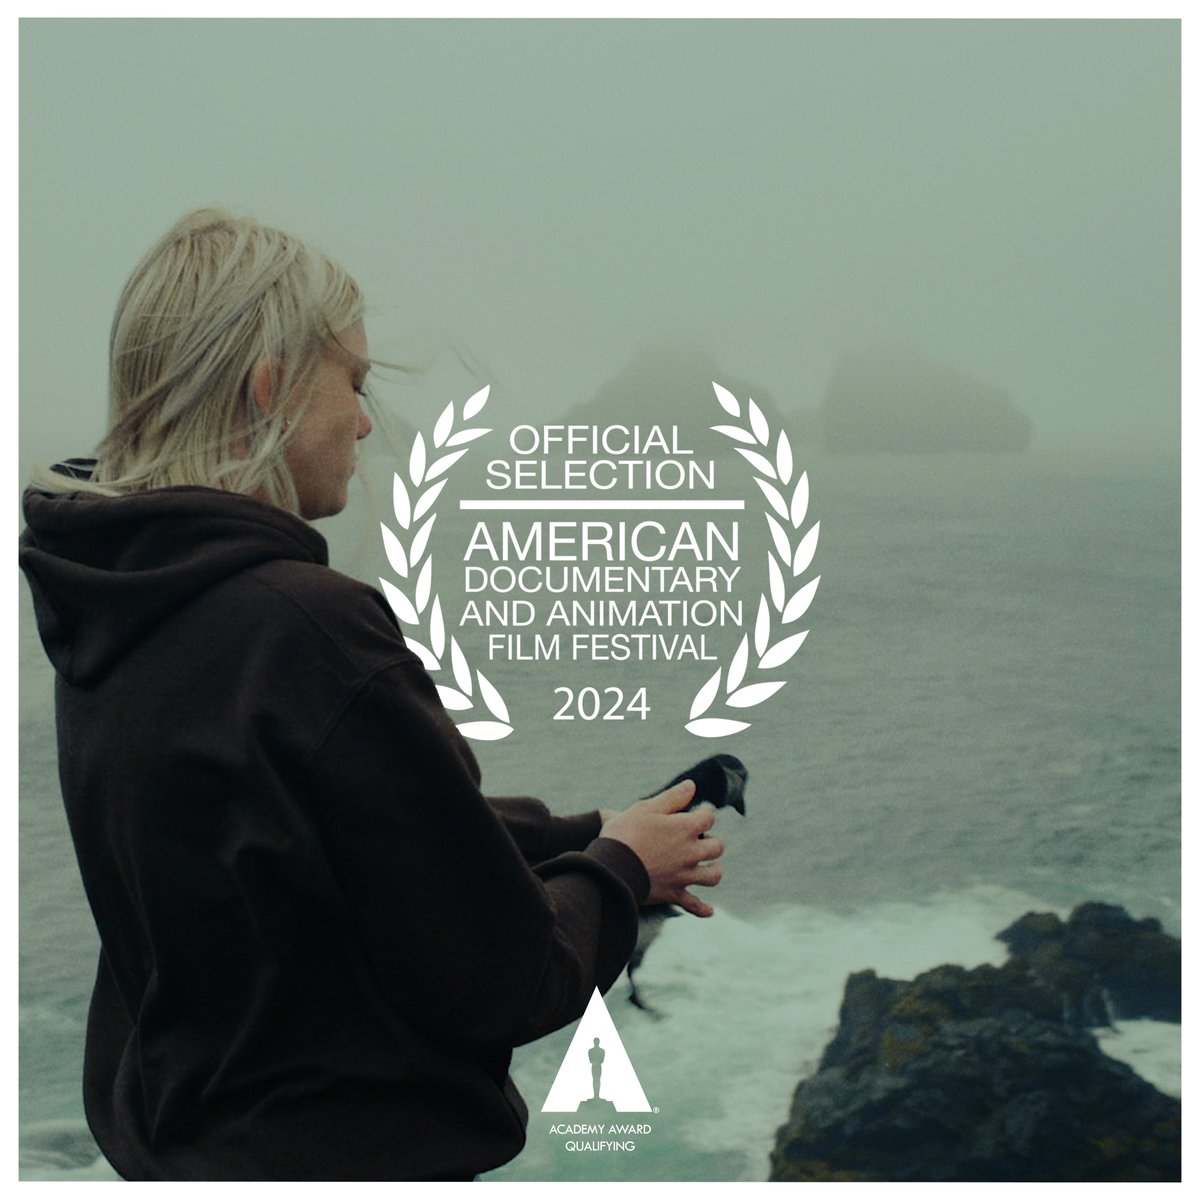 We're thrilled that Puffling has been selected for the Oscar-qualifying American Documentary and Animation Film Festival (@Amdocfilmfest)! Catch us at 1.30pm on March 24th at #AmDocs2024